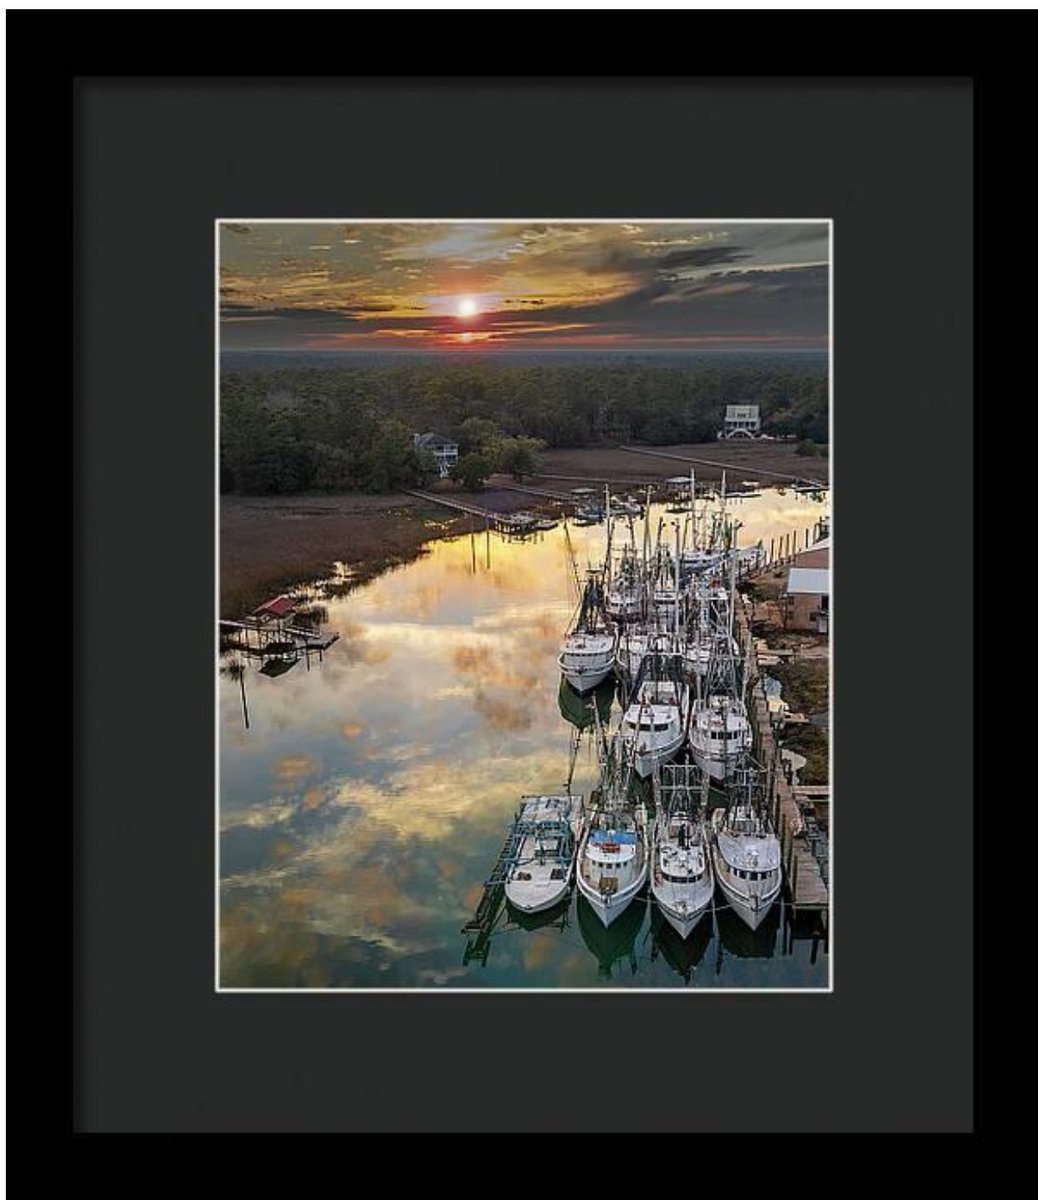 Thanks to my buyer who bought this print today of Jeremy Creek It is a favorite of mine too! fineartamerica.com/saleannounceme… #southcarolina #Charlestonsc #boats #shrimpers #sunsets #lowcountry #landscapephotography #landscapes #travel #travelphotography #buyintoart #ayearforart